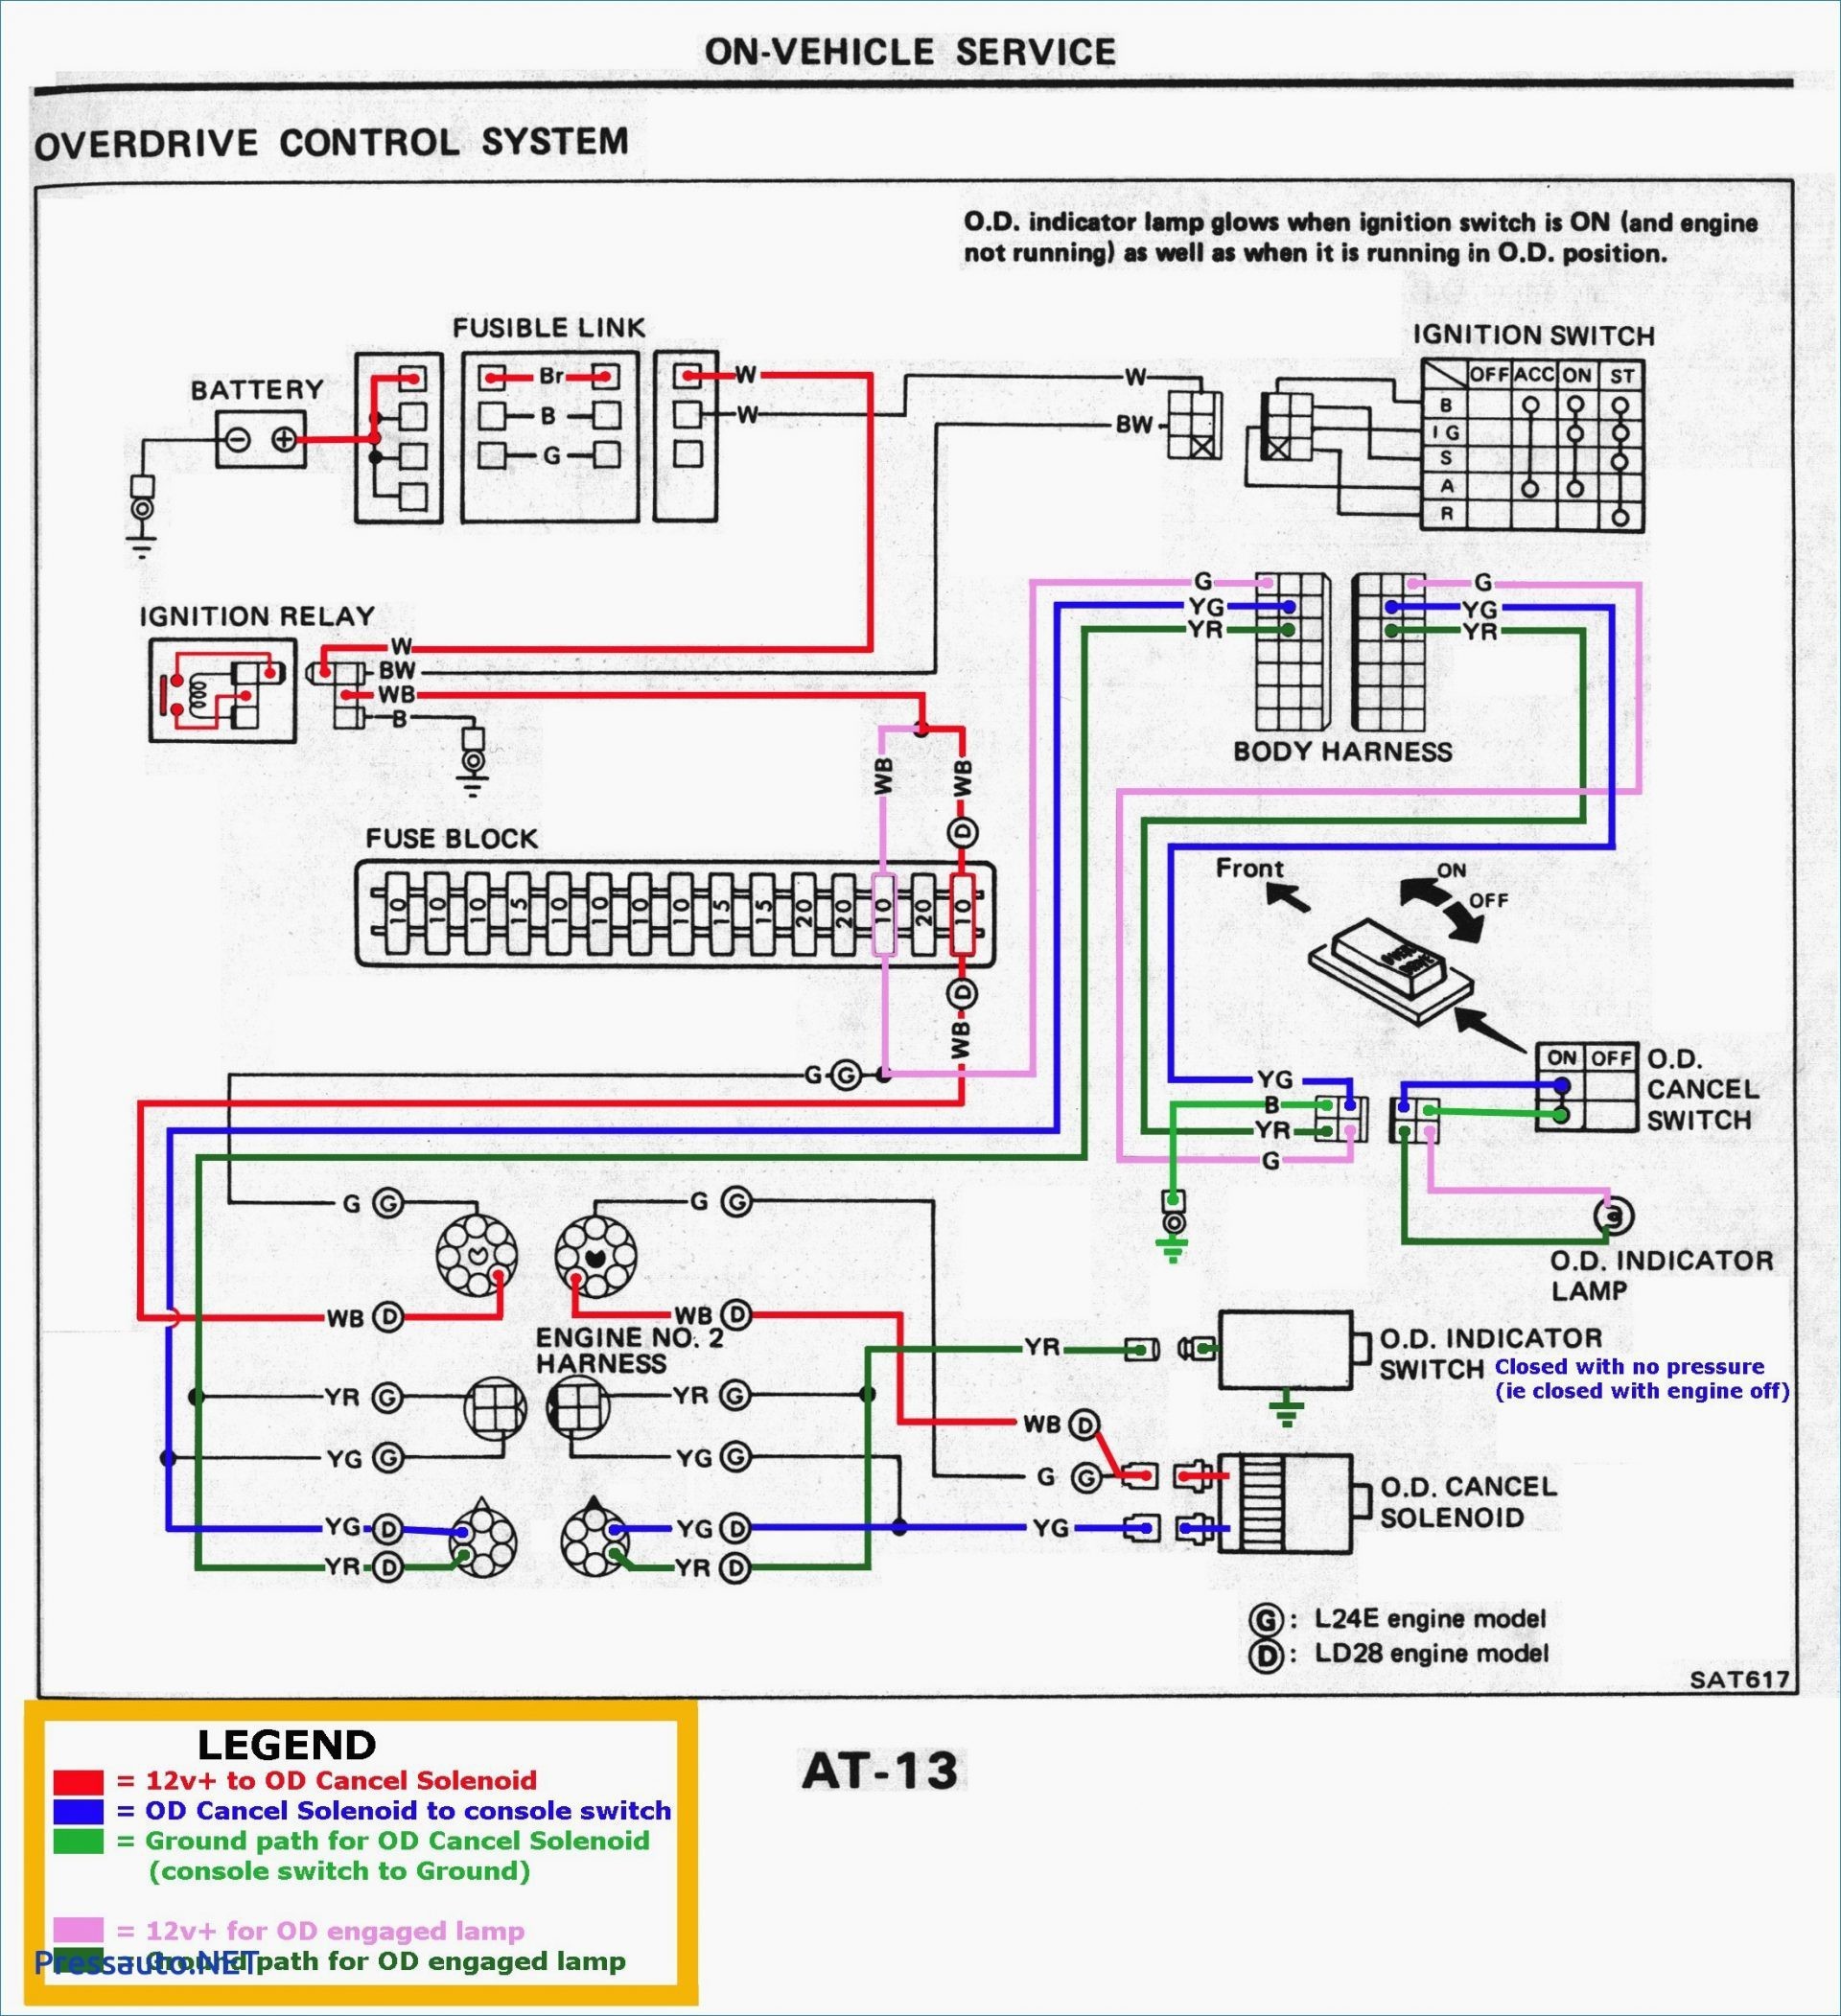 Toyota Fog Lights Wiring Diagram Wiring Diagram Technic Toyota Headlight Dimmer Switch Diagram In Addition 2007 Toyota Camry